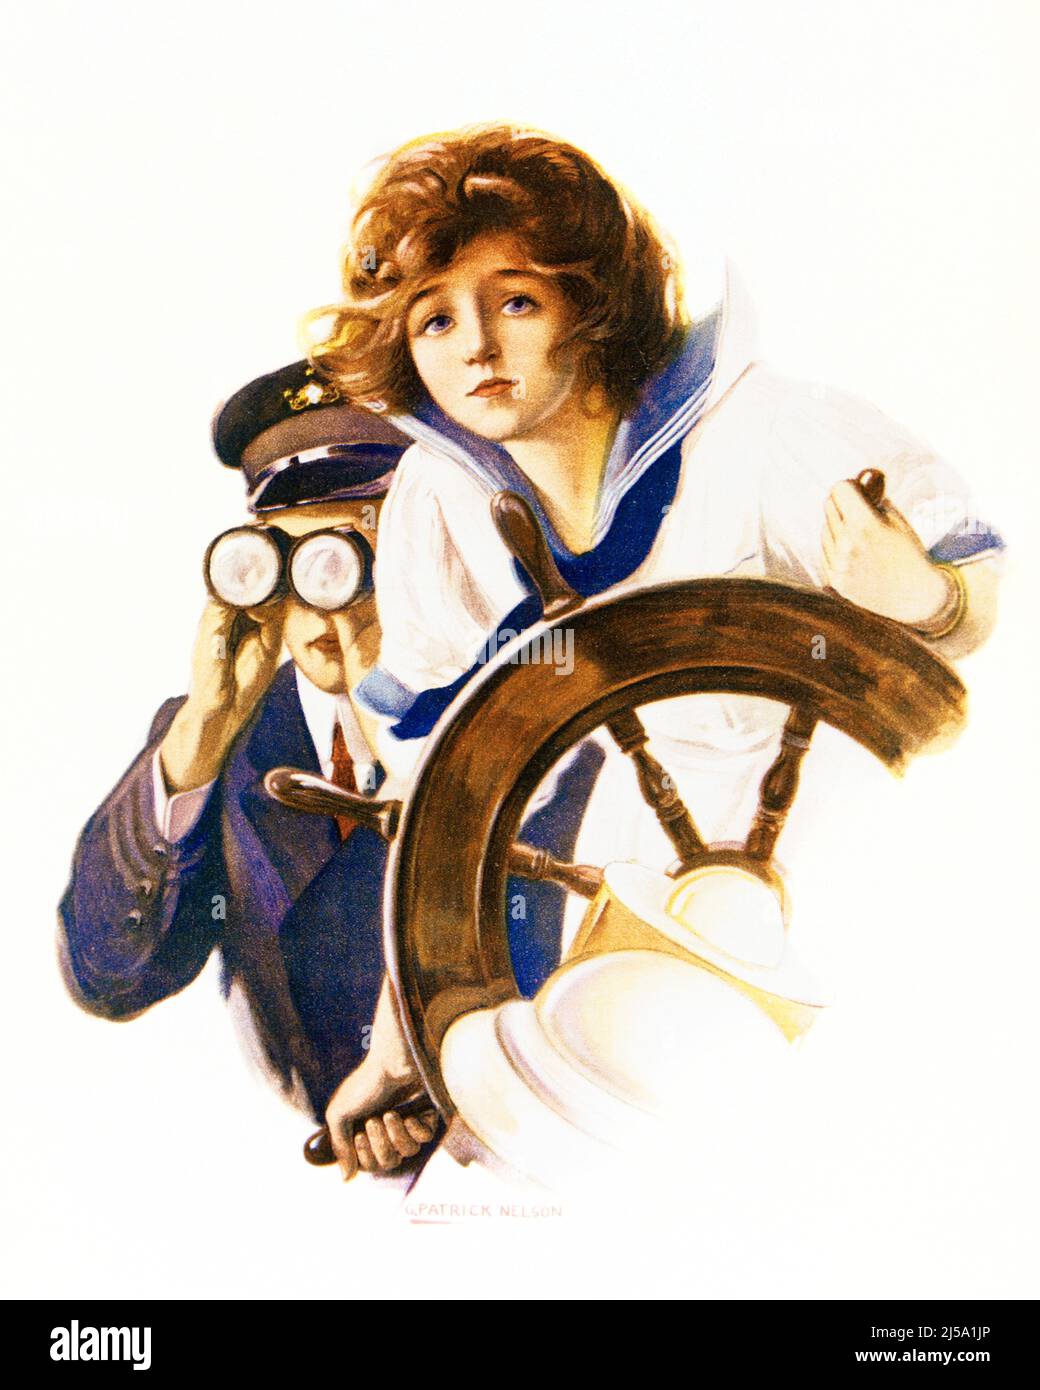 1910s YOUNG WOMAN WEARING NAUTICAL COLLAR BLOUSE AT HELM OF YACHT WITH MAN IN UNIFORM BEHIND LOOKING AHEAD WITH BINOCULARS - ky2886 NAW001 HARS AROUND PAIR SEA COLLAR COLOR HER BINOCULARS OLD TIME NOSTALGIA PEEKING OLD FASHION 1 JUVENILE STYLE SAILING YOUNG ADULT WEALTHY VACATION RICH YACHT LIFESTYLE OCEAN COVER SAILOR FEMALES BOATS COPY SPACE LADIES DAUGHTERS PERSONS MALES SAIL NAUTICAL SAILBOAT TRANSPORTATION FATHERS TIME OFF HEAD AND SHOULDERS CANVAS HELM TURN OF THE 20TH CENTURY TRIP GETAWAY DADS SUNDAY MAGAZINE AUBURN HAIR BLOUSE HOLIDAYS UPSCALE CONCEPTUAL ILLUSTRATOR AFFLUENT SHIP'S Stock Photo